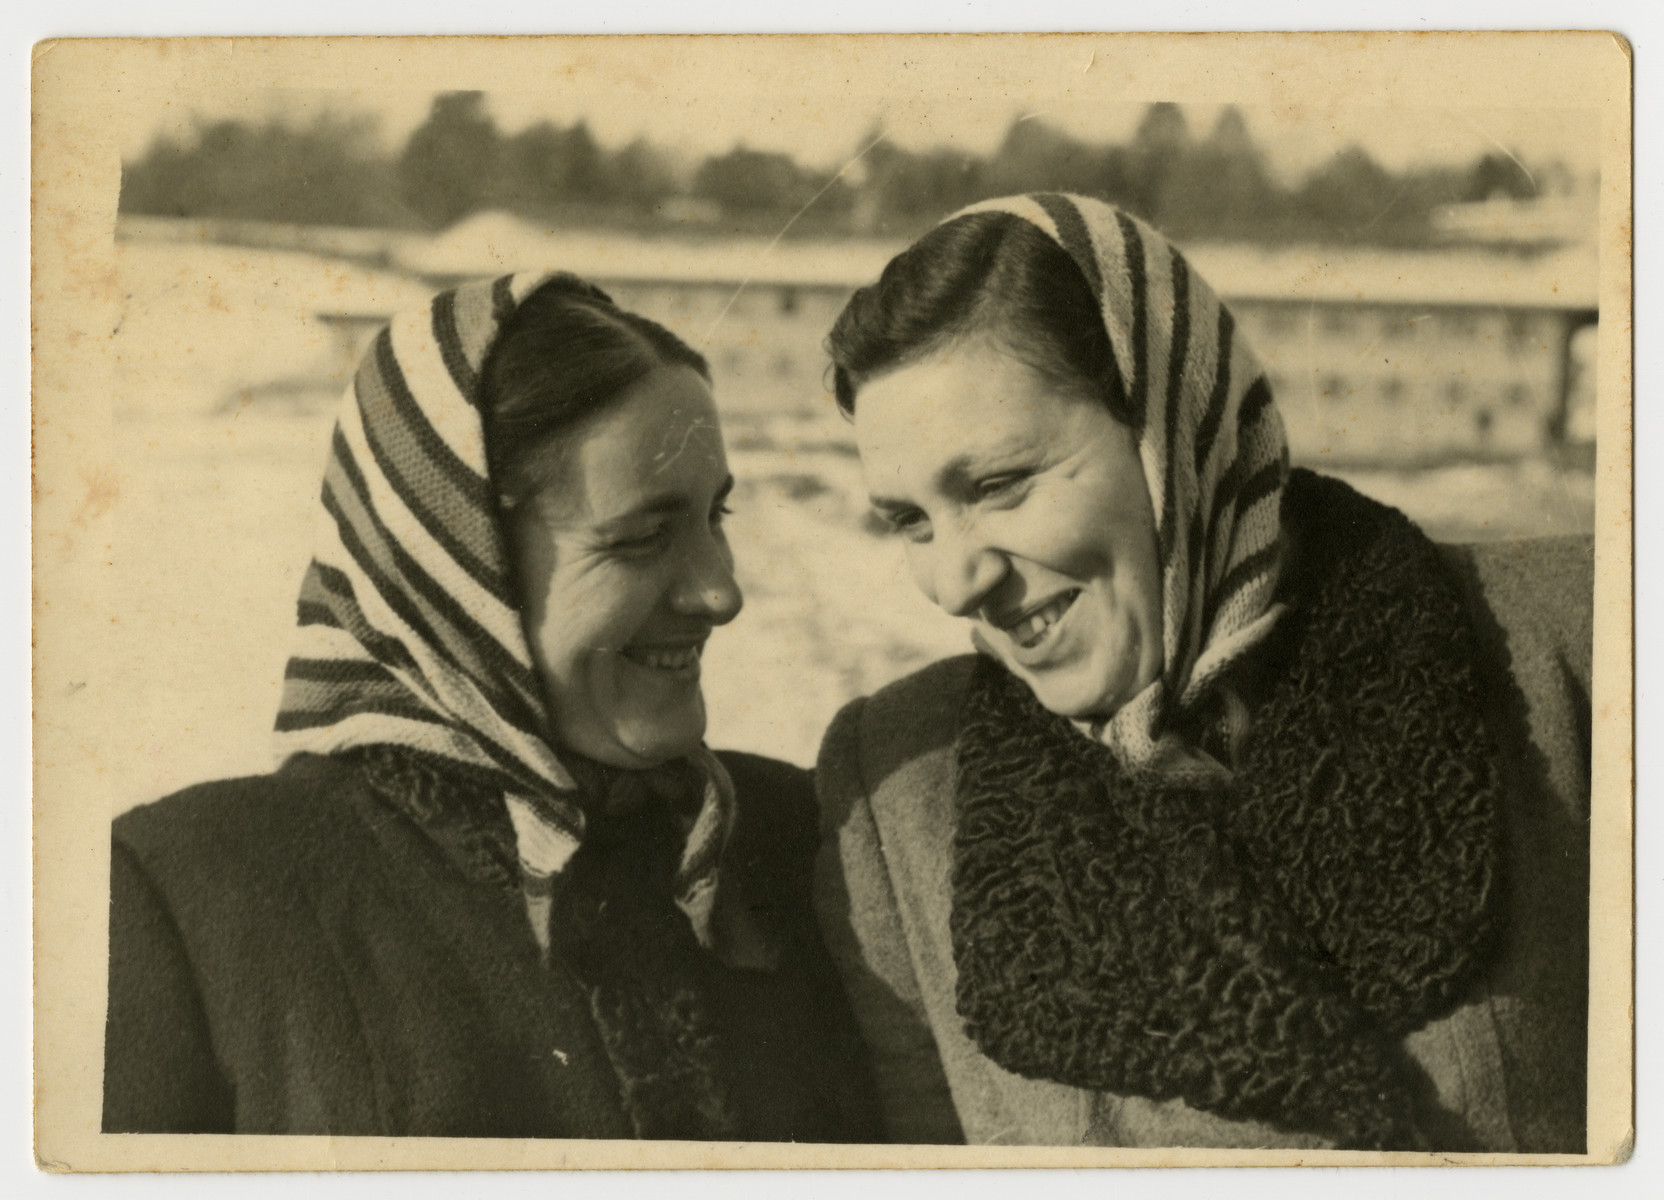 Close-up portrait of Jenta (Helen) Shapiro (left) and her friend Mira Salberg.  

The two women traveled together after liberation to look for their families.